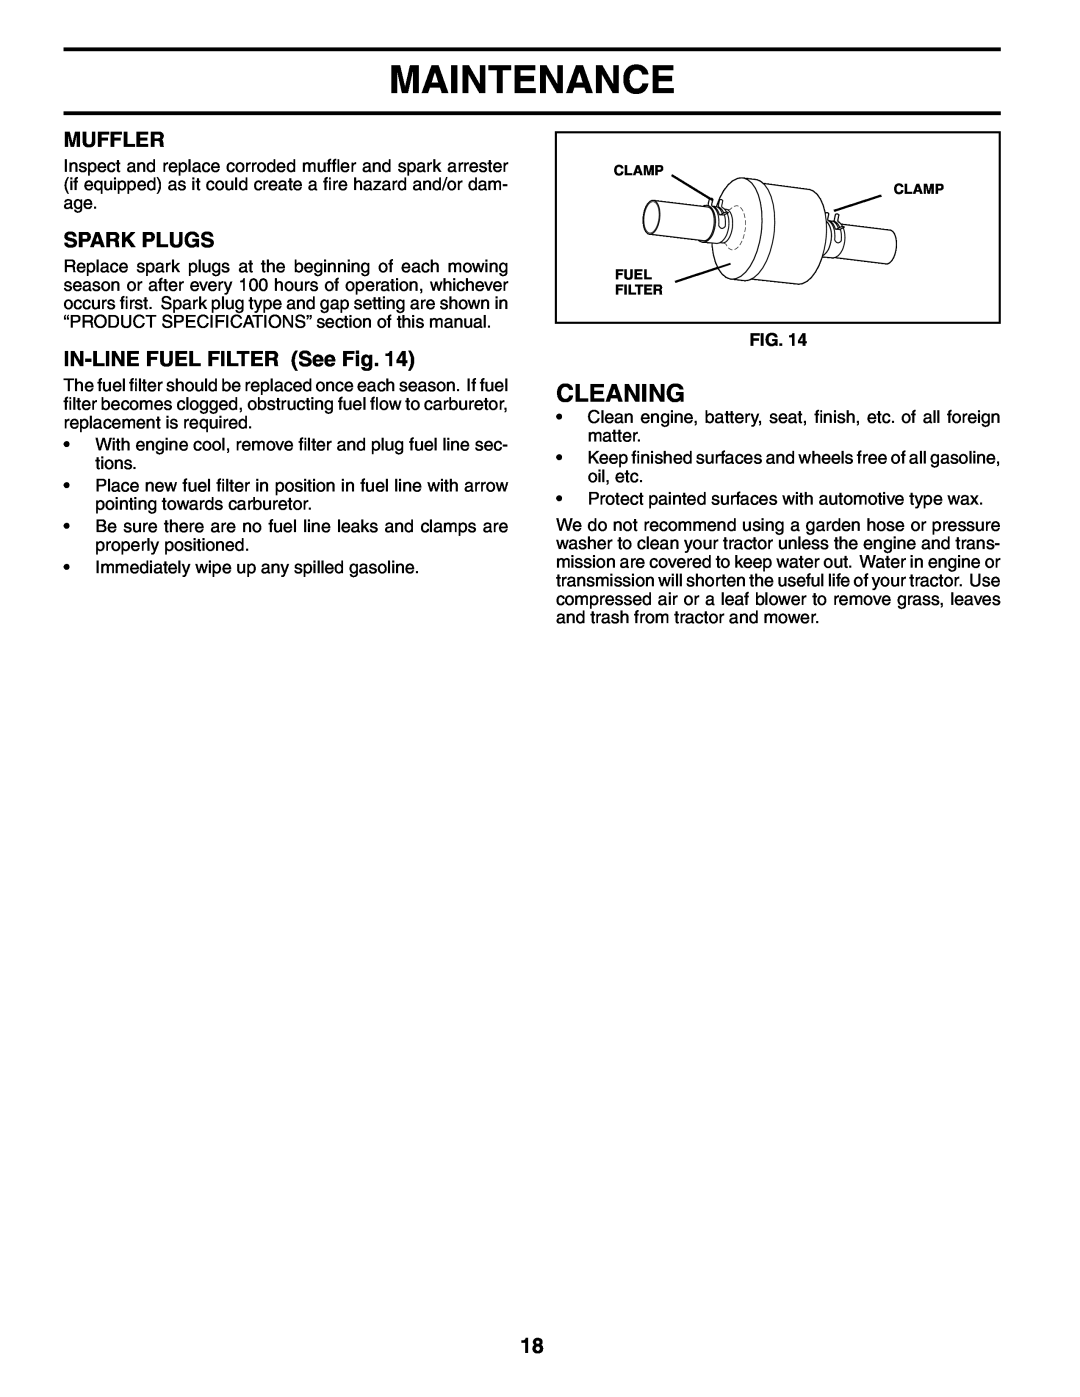 Weed Eater 187637 manual Cleaning, Muffler, Spark Plugs, IN-LINE FUEL FILTER See Fig, Maintenance 